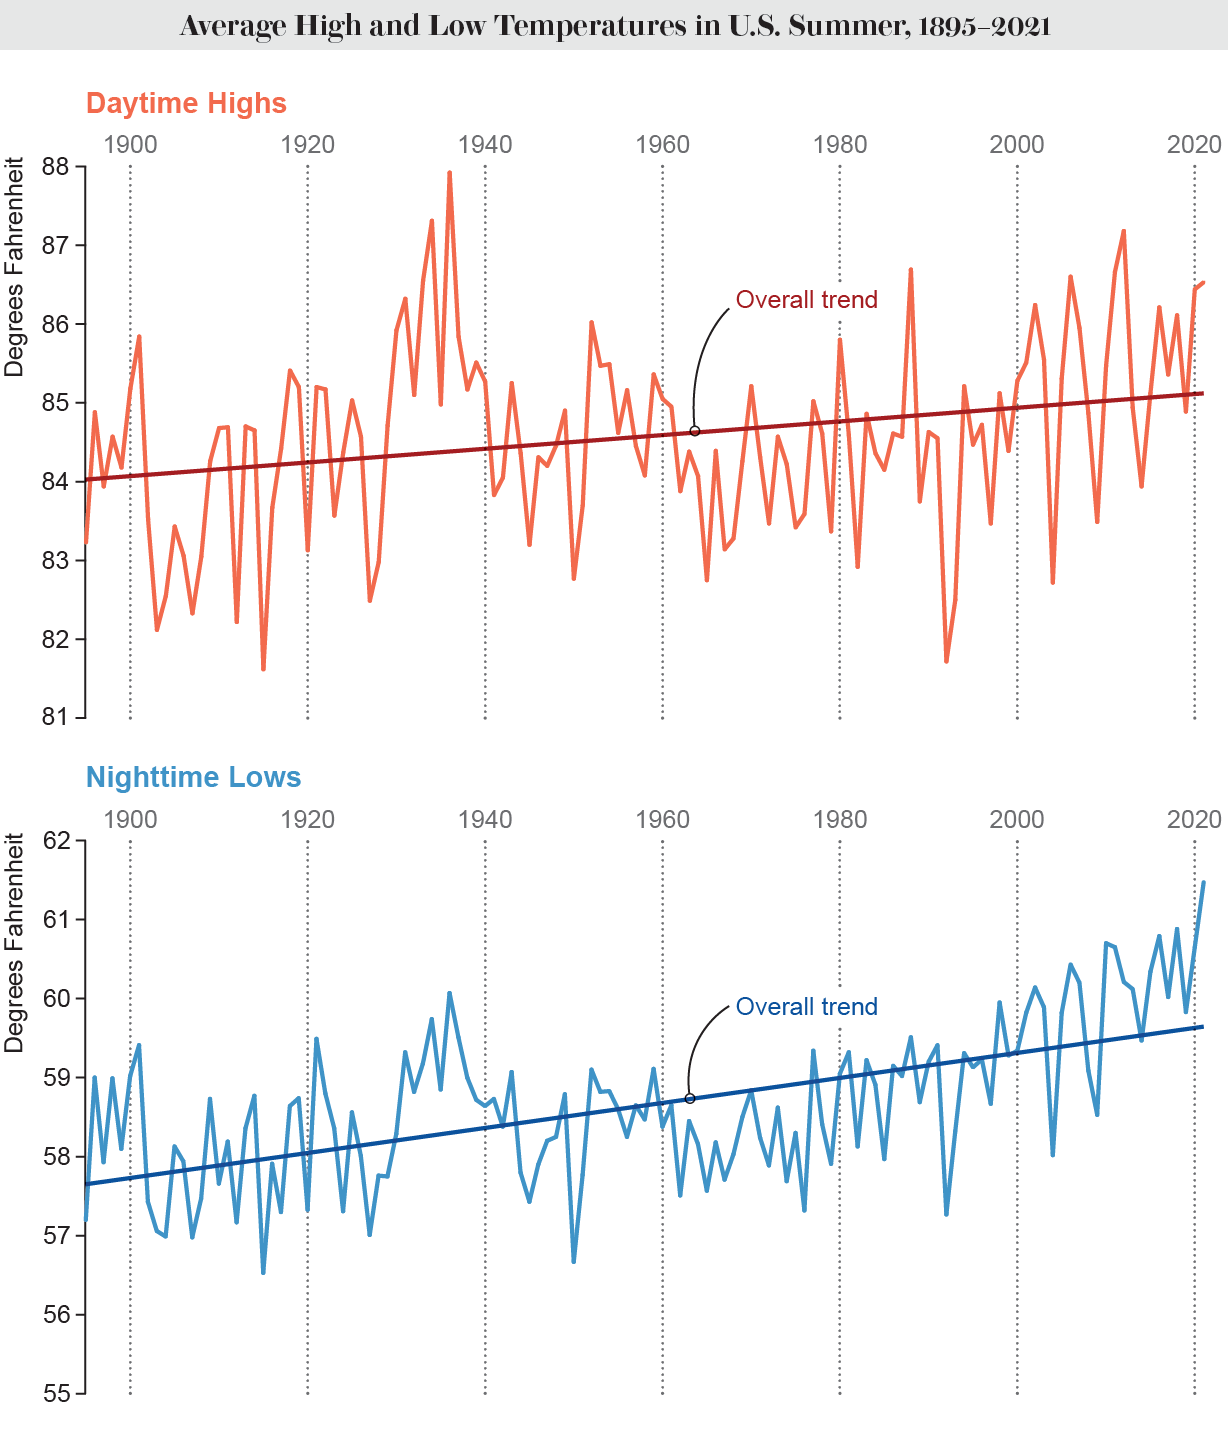 Line charts show average high and low temperatures in U.S. summer from 1895 to 2021, with overall trends showing increases.